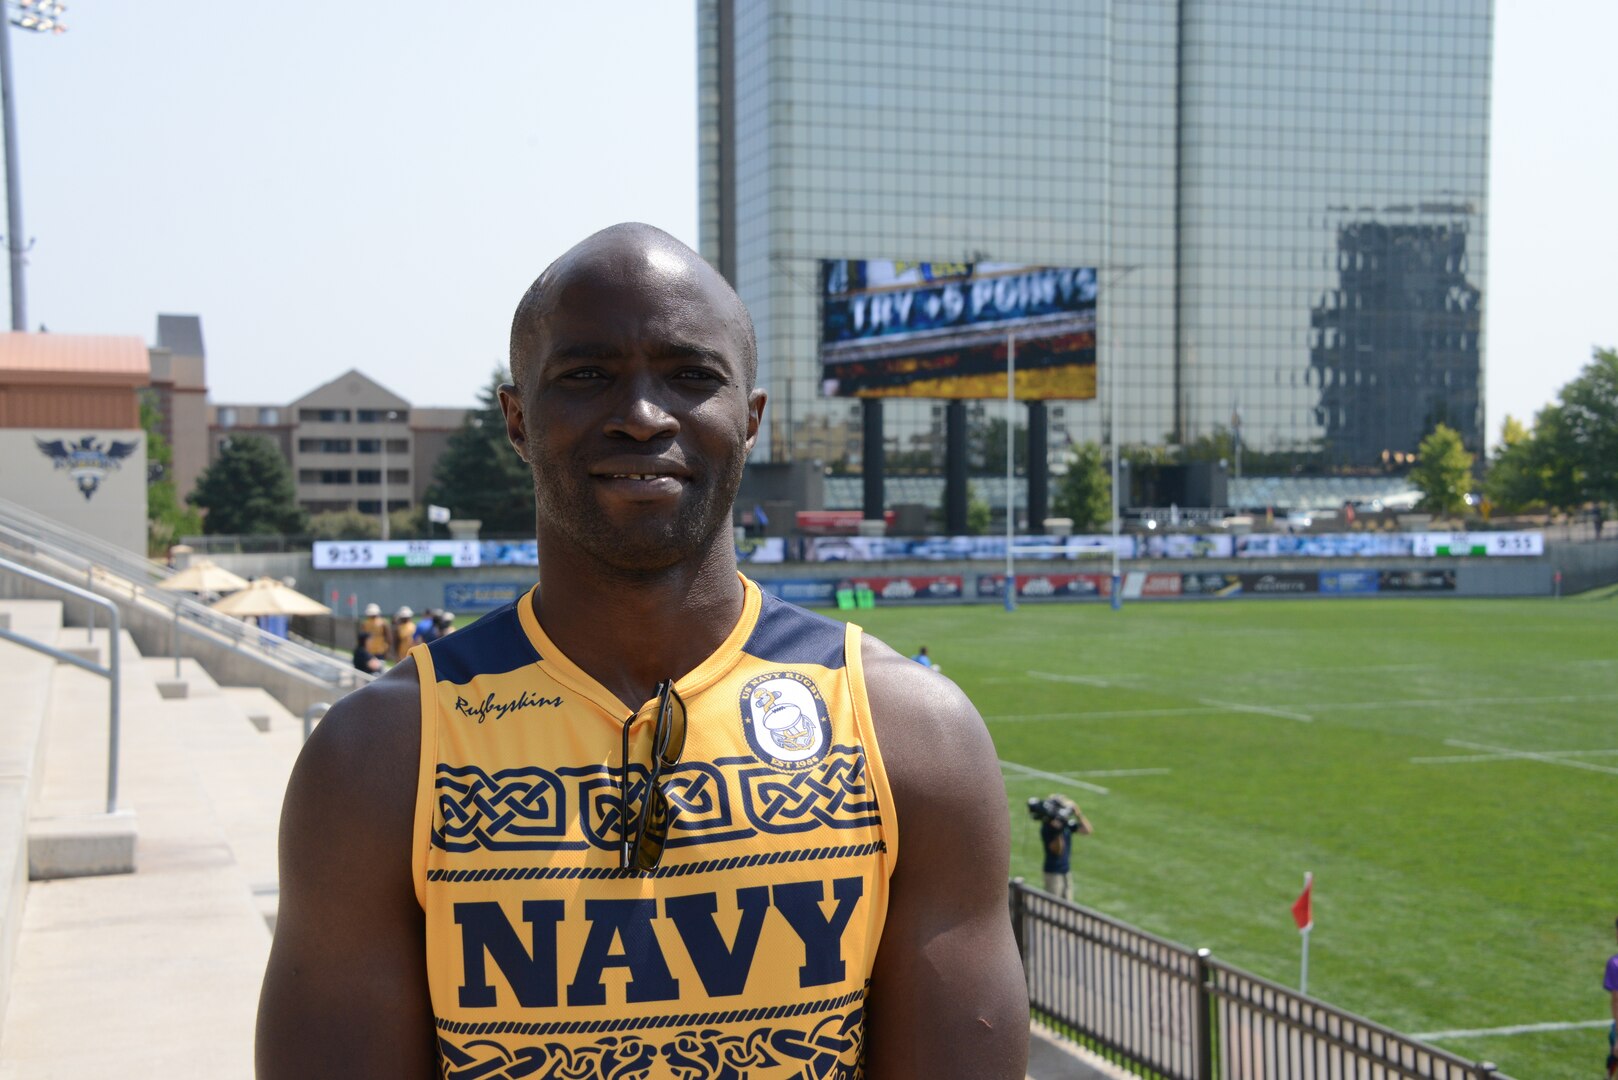 GLENDALE, Colo. – Navy Hospital Corpsman Cyprian Shimenga of Portsmouth, Va. stands if front of the pitch at 2018 Armed Forces Rugby Sevens Championship at Infinity Park, home of Rugbytown USA (Glendale, Colo.), Aug. 24-26, 2018. All Five Service branches are represented individually to compete in the 7th annual head-to-head competition. U.S. Navy photo by Mass Communication Specialist 2nd Class Tyler Caswell (Released).